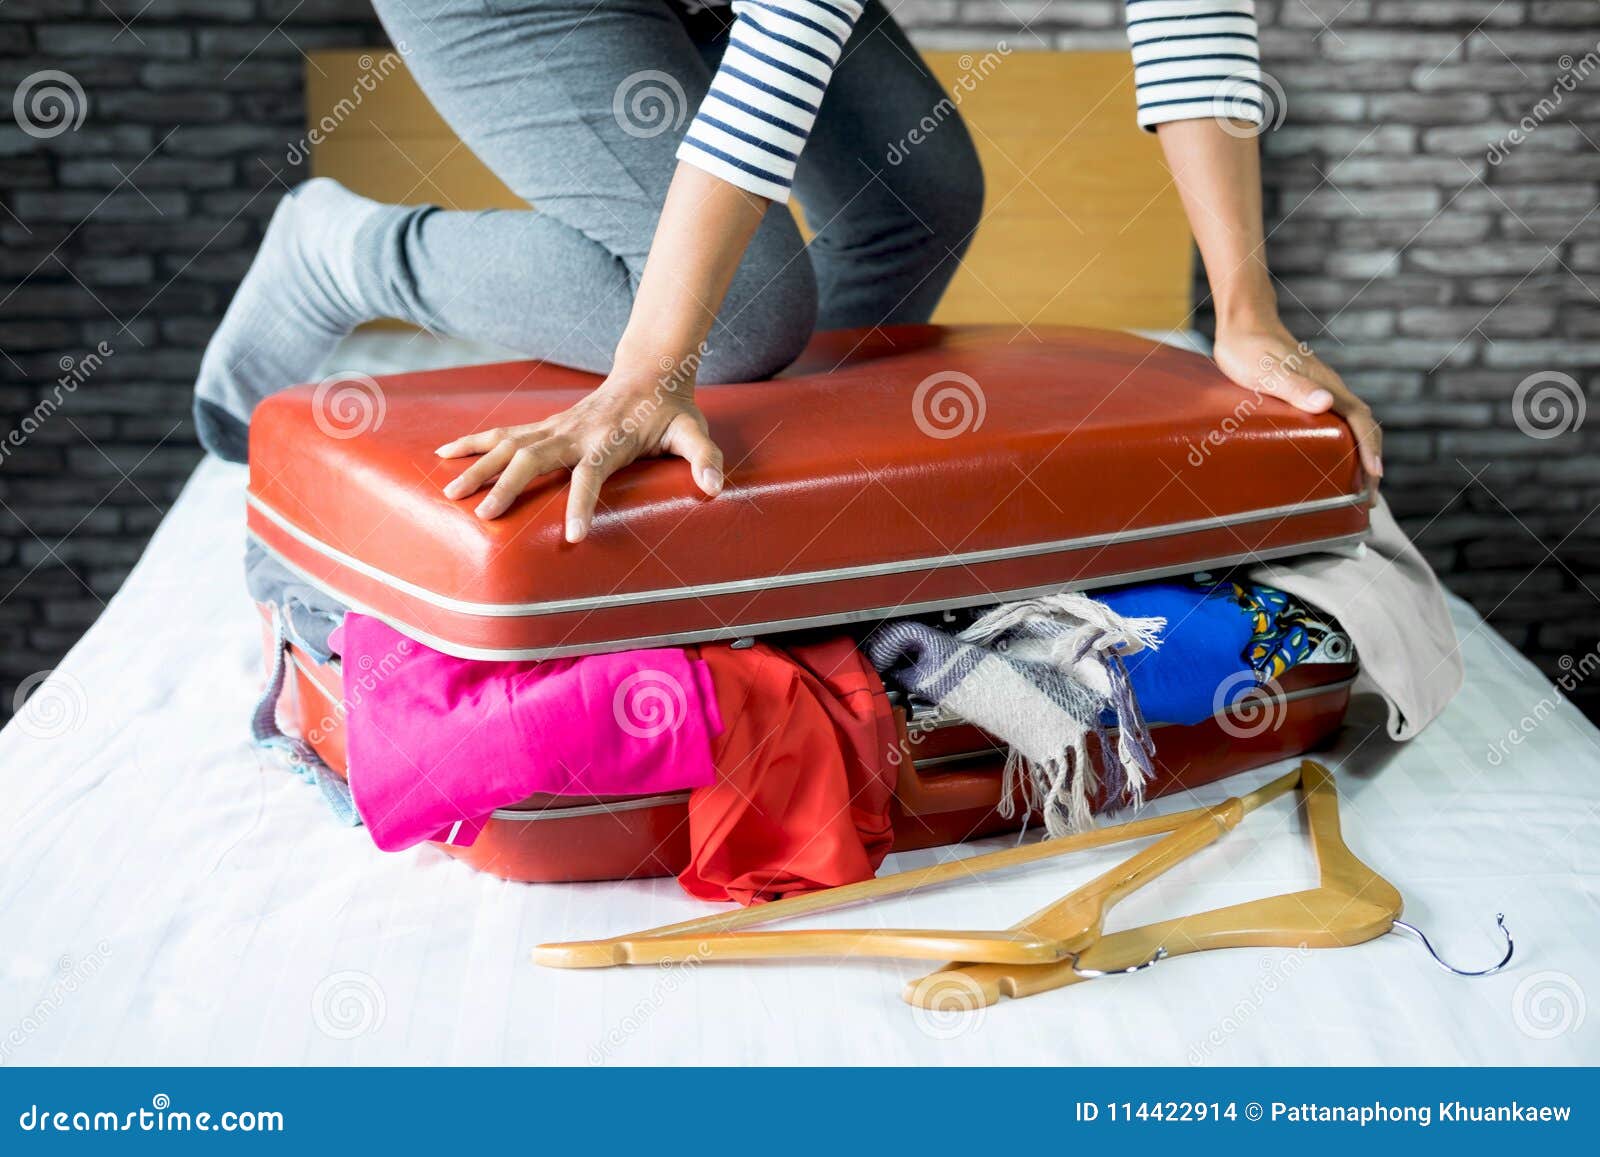 Young woman packing luggage in bedroom at home stock photo